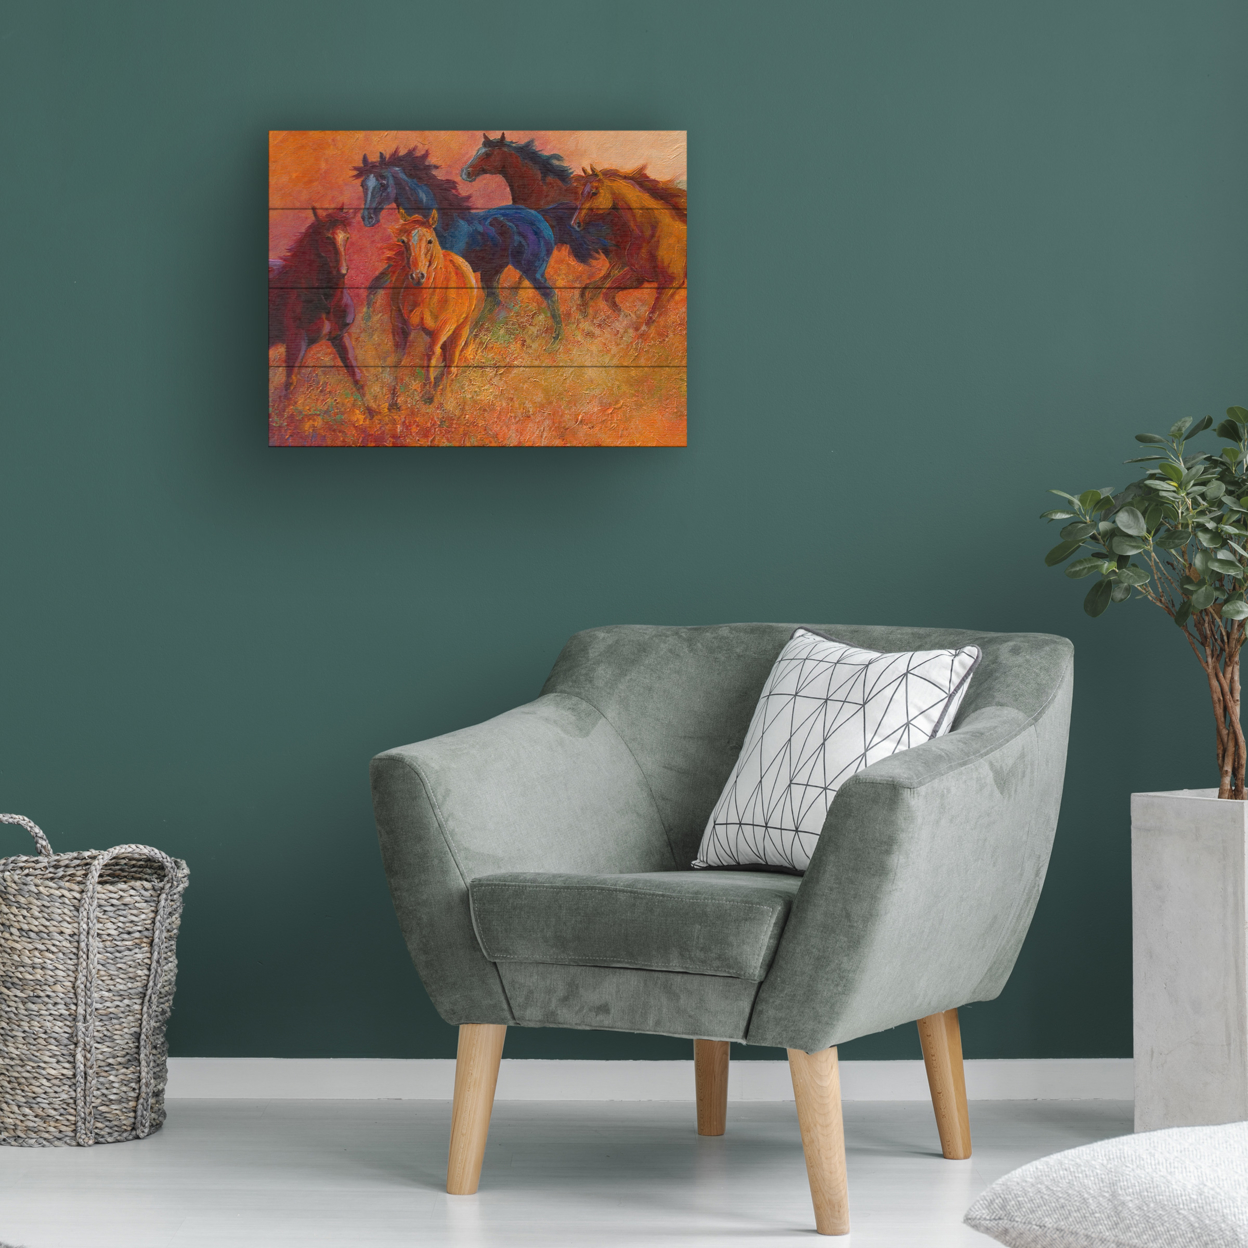 Wall Art 12 X 16 Inches Titled Free Range Horses Ready To Hang Printed On Wooden Planks